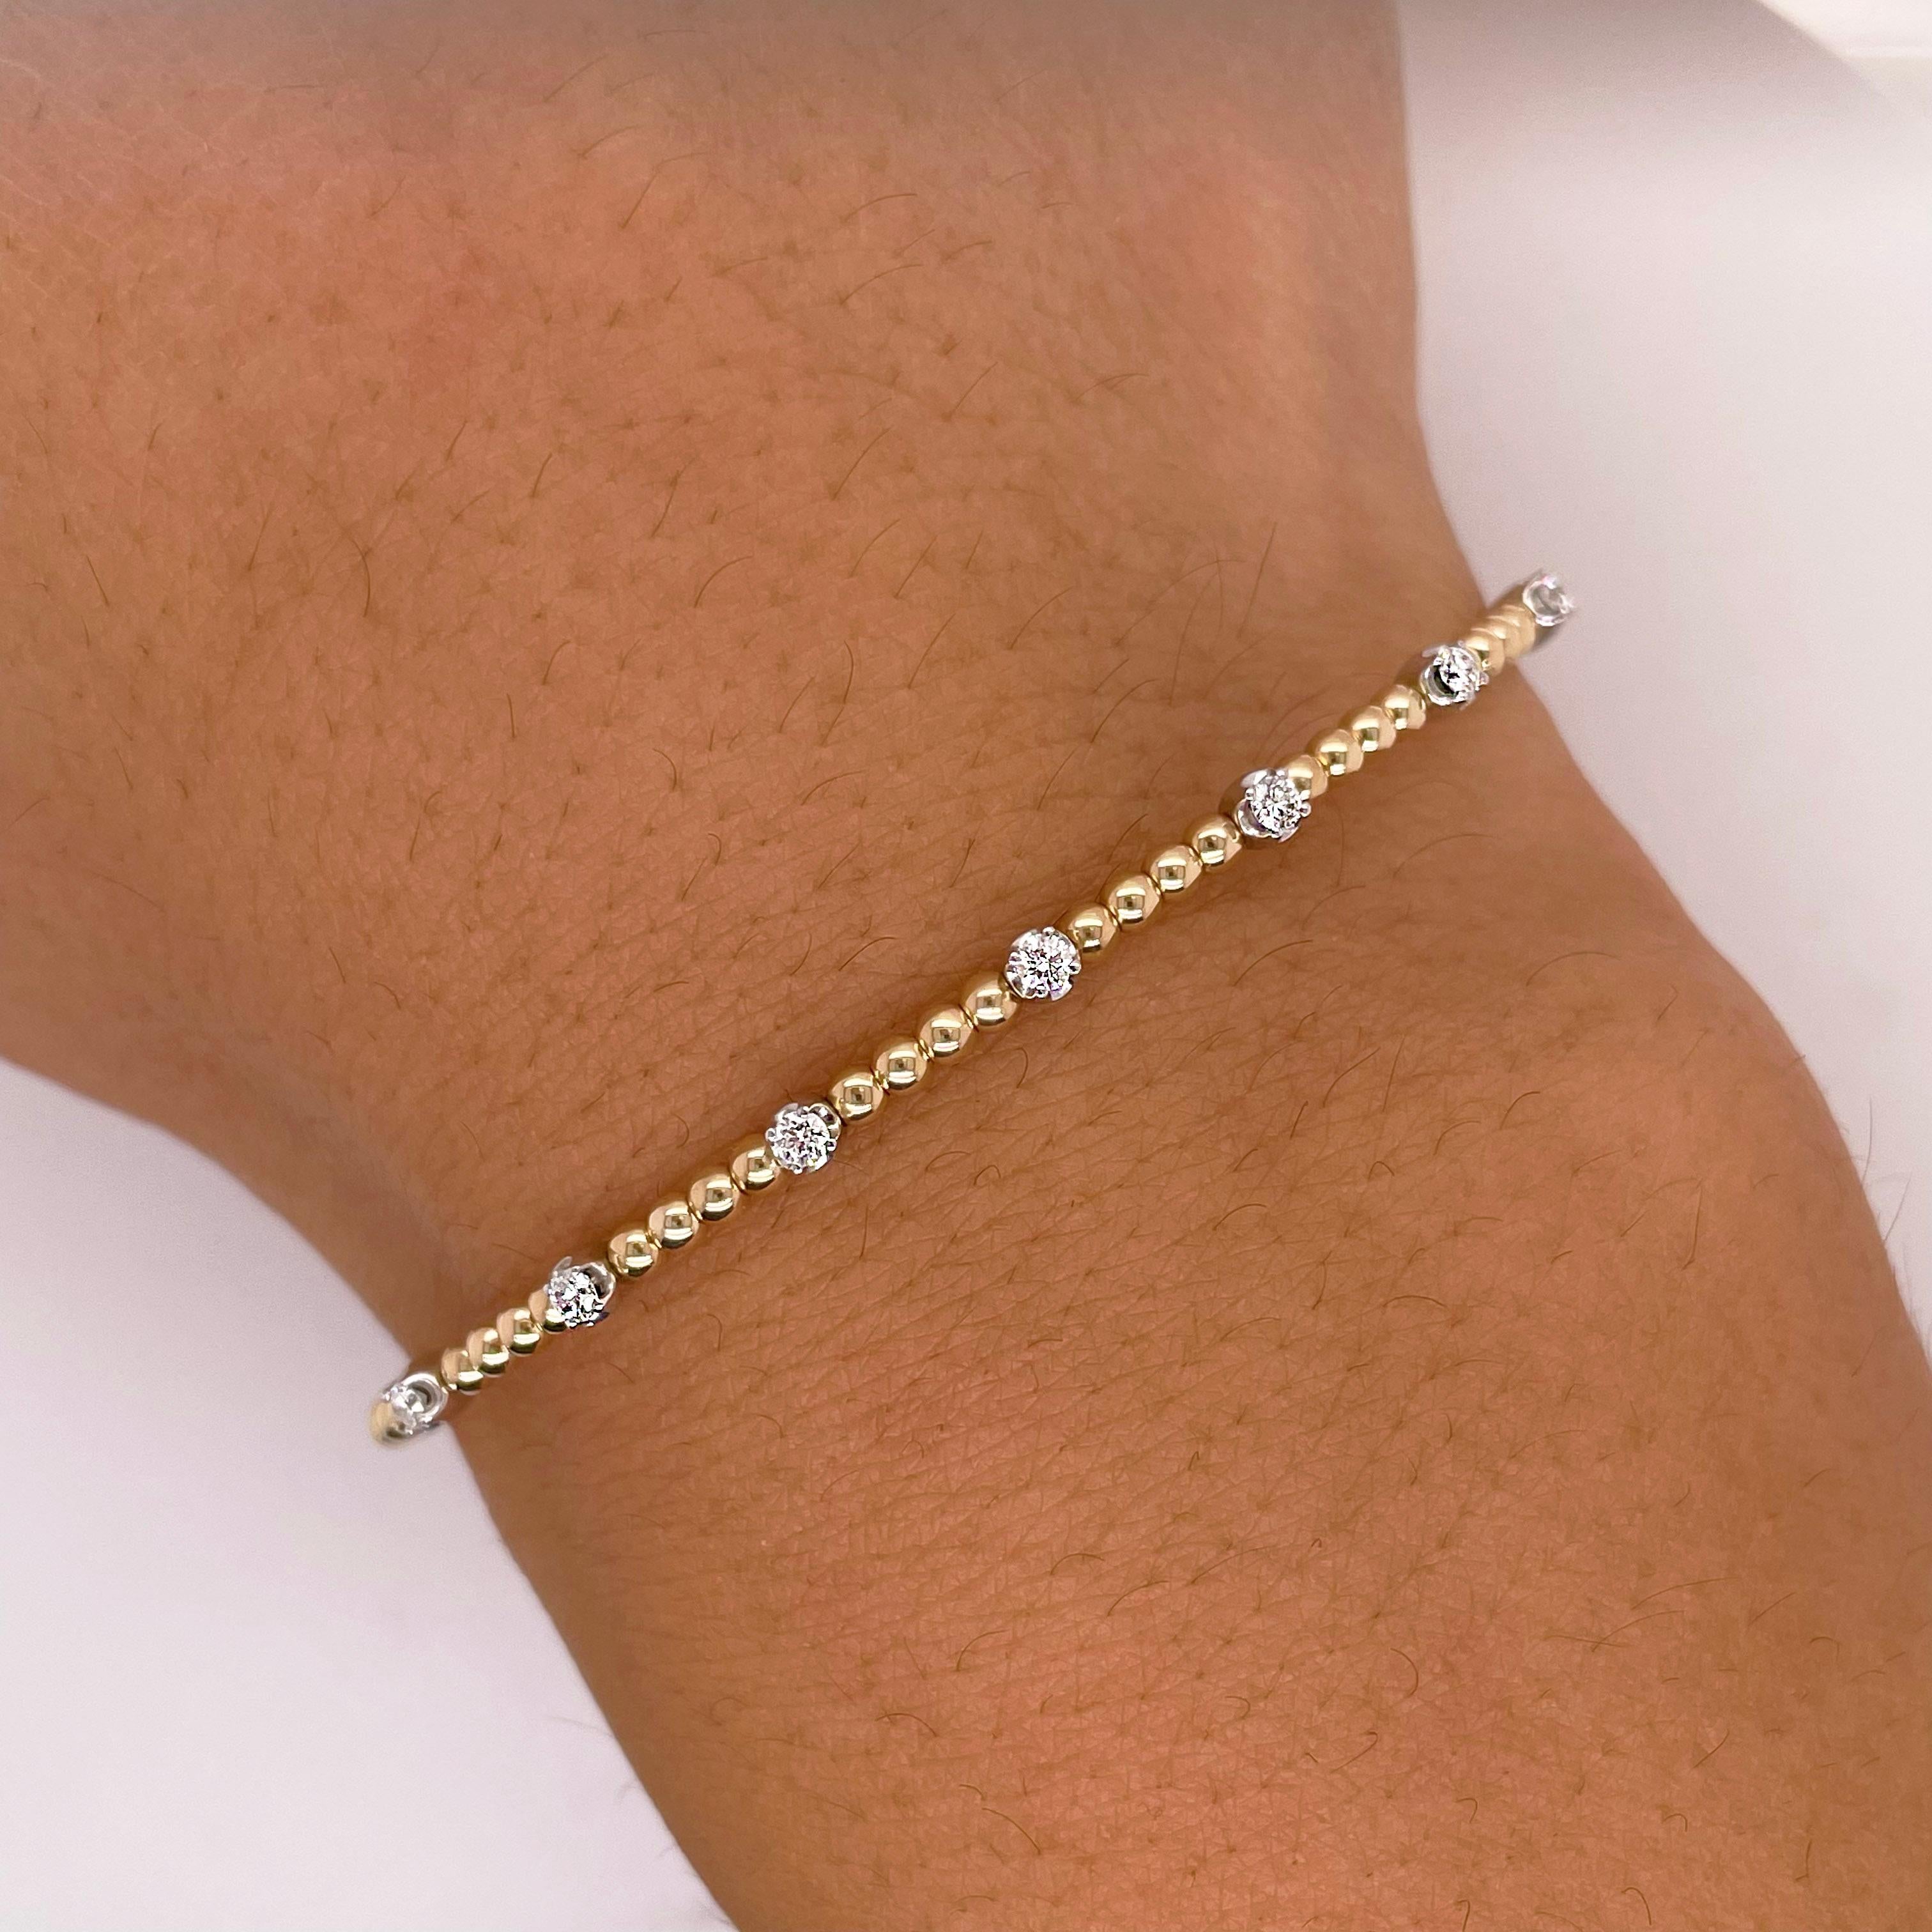 The details for this gorgeous bracelet are listed below:
Bracelet Type: Cuff, Bangle
Metal Quality: 14K White-Yellow Gold
Length: 6 cm (6.5 inches)
Width: 2.25 mm
Clasp: Flexible Bangle
Diamond Shape: Round Brilliant
Diamond Weight: .20